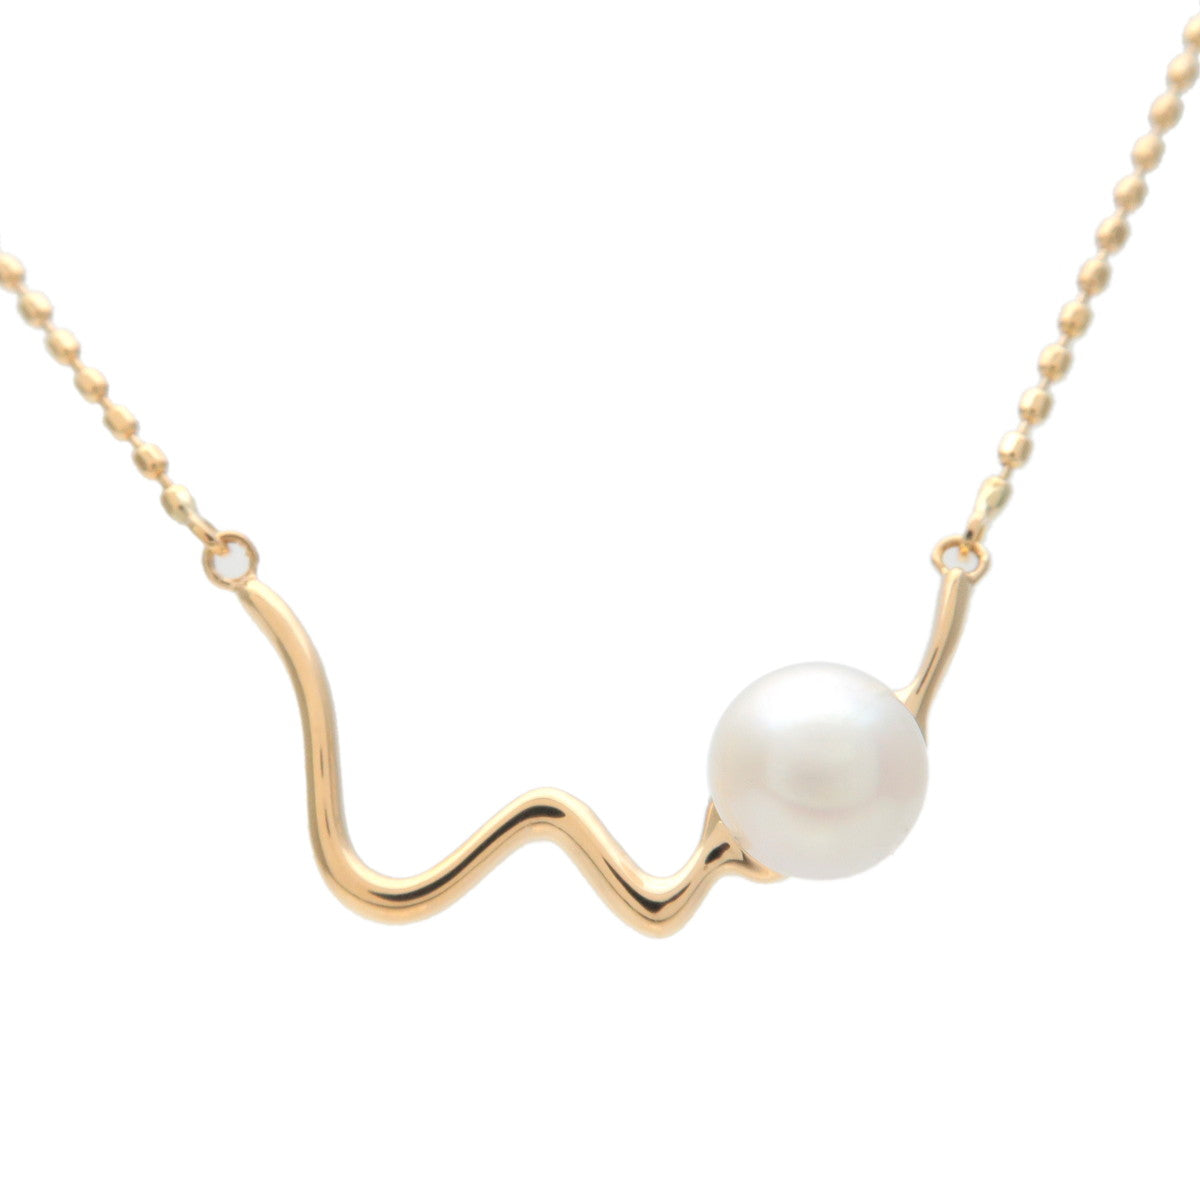 Ponte-Vecchio-Pearl-Necklace-K18-750-Yellow-Gold-5.1mm-Pearl